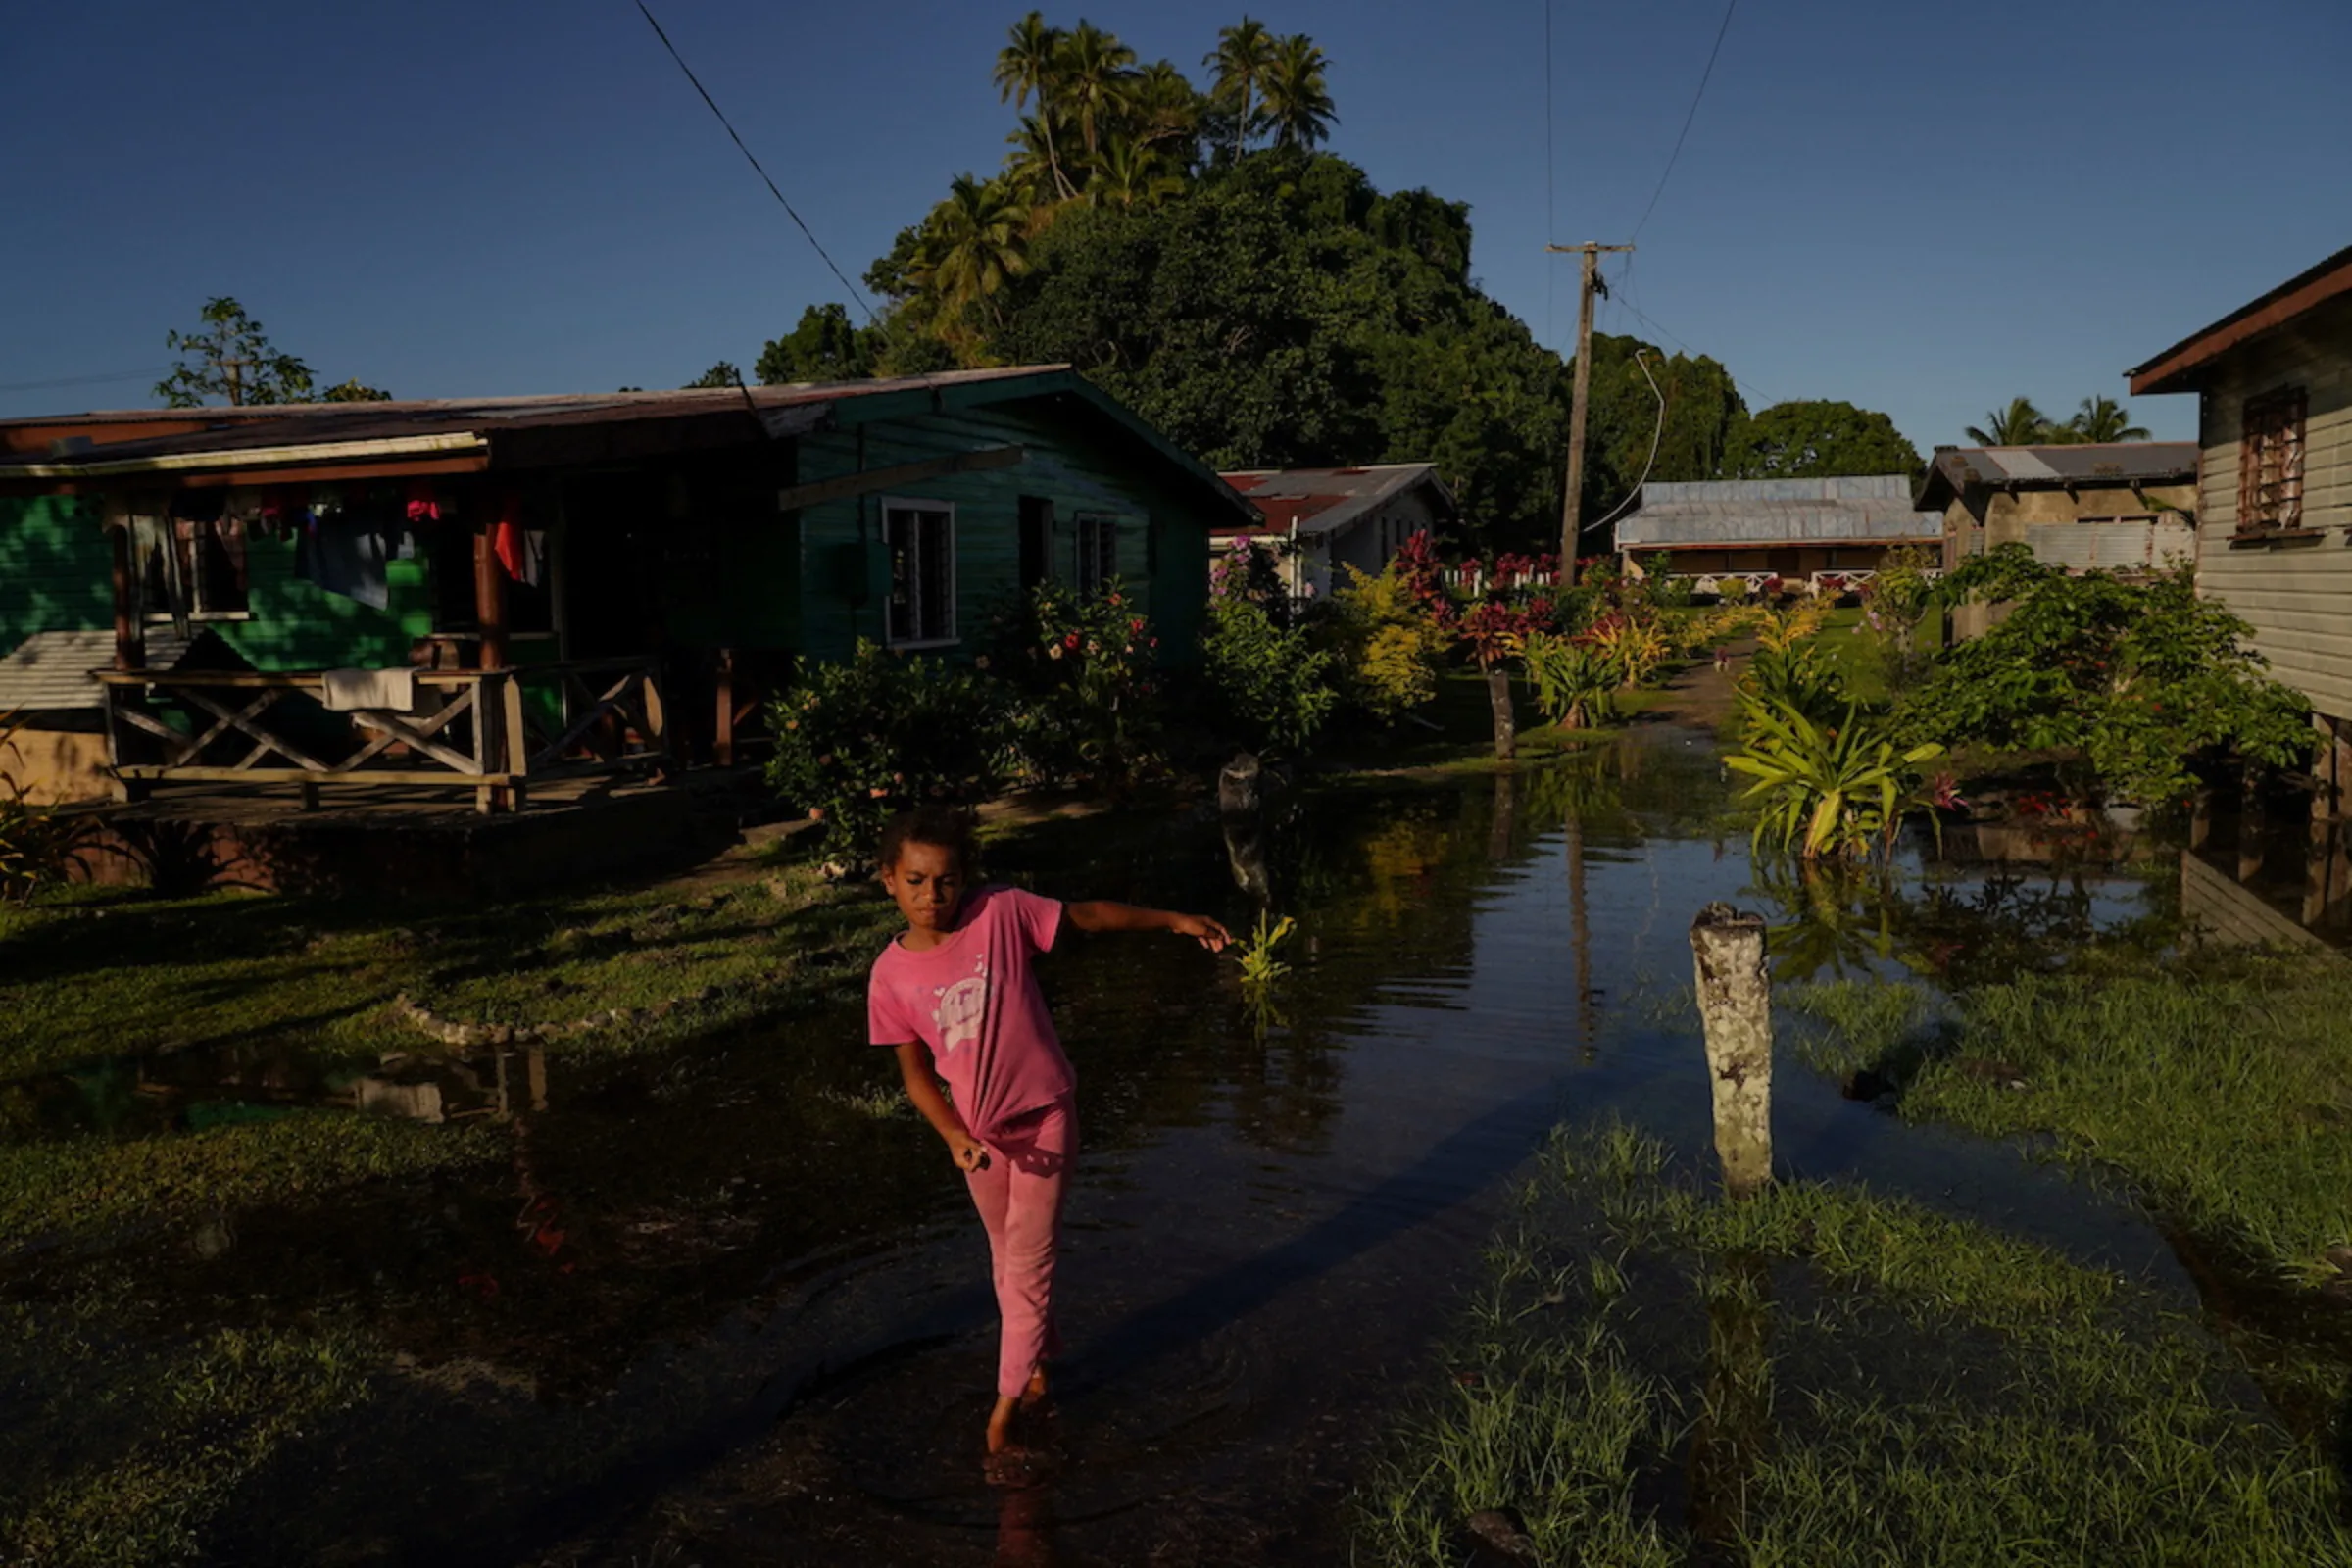 A local girl wades through seawater flooding her community during high tide in Serua Village, Fiji, July 15, 2022. As the community runs out of ways to adapt to the rising Pacific Ocean, the 80 villagers face the painful decision whether to move. REUTERS/Loren Elliott